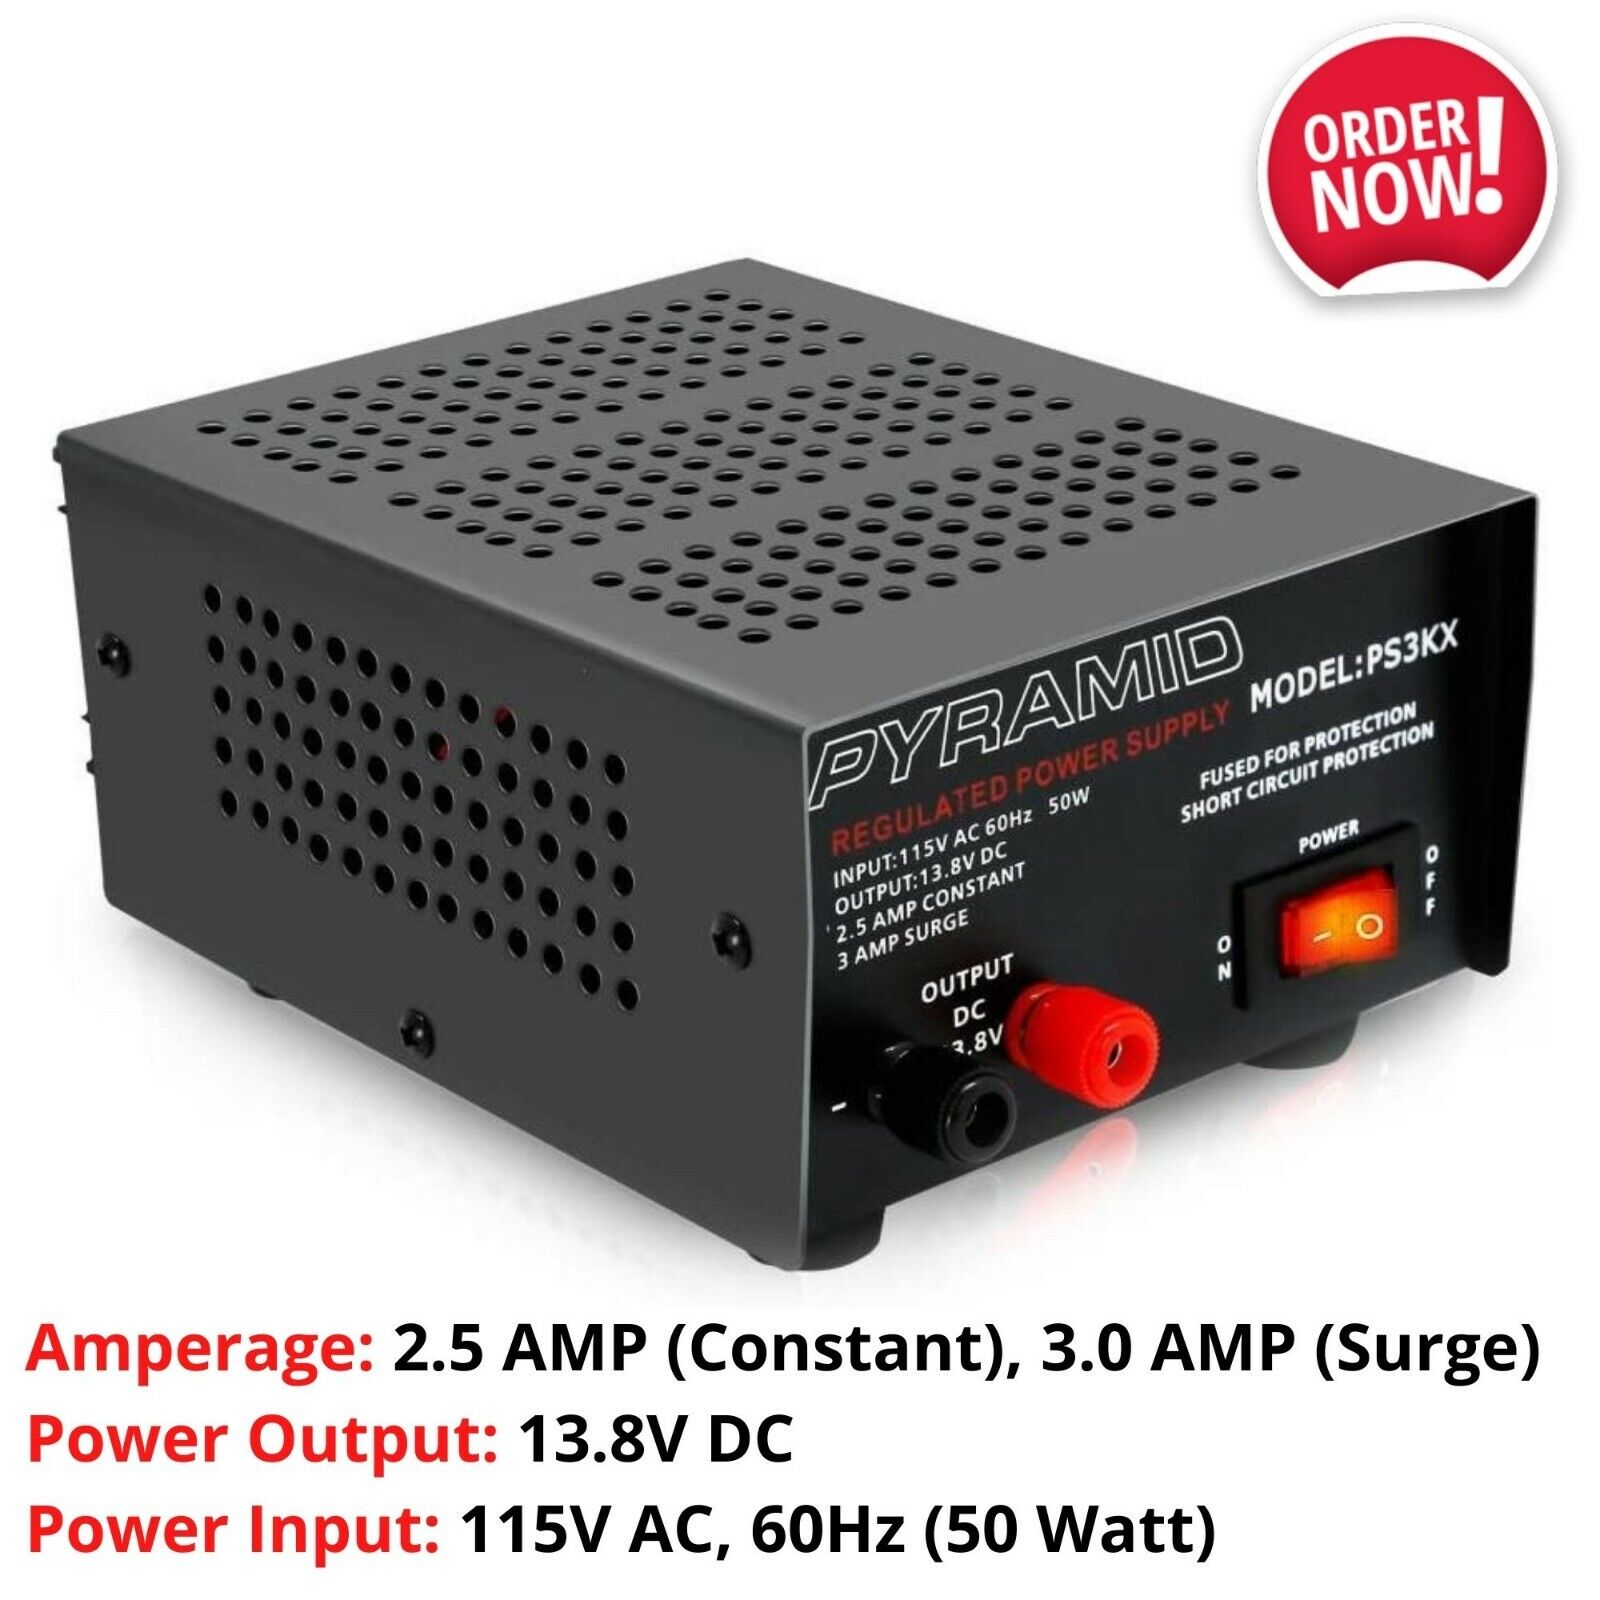 Universal Compact Bench Power Supply 2.5Amp Linear Regulated AC-DC 12V HAM Radio. Available Now for $91.96